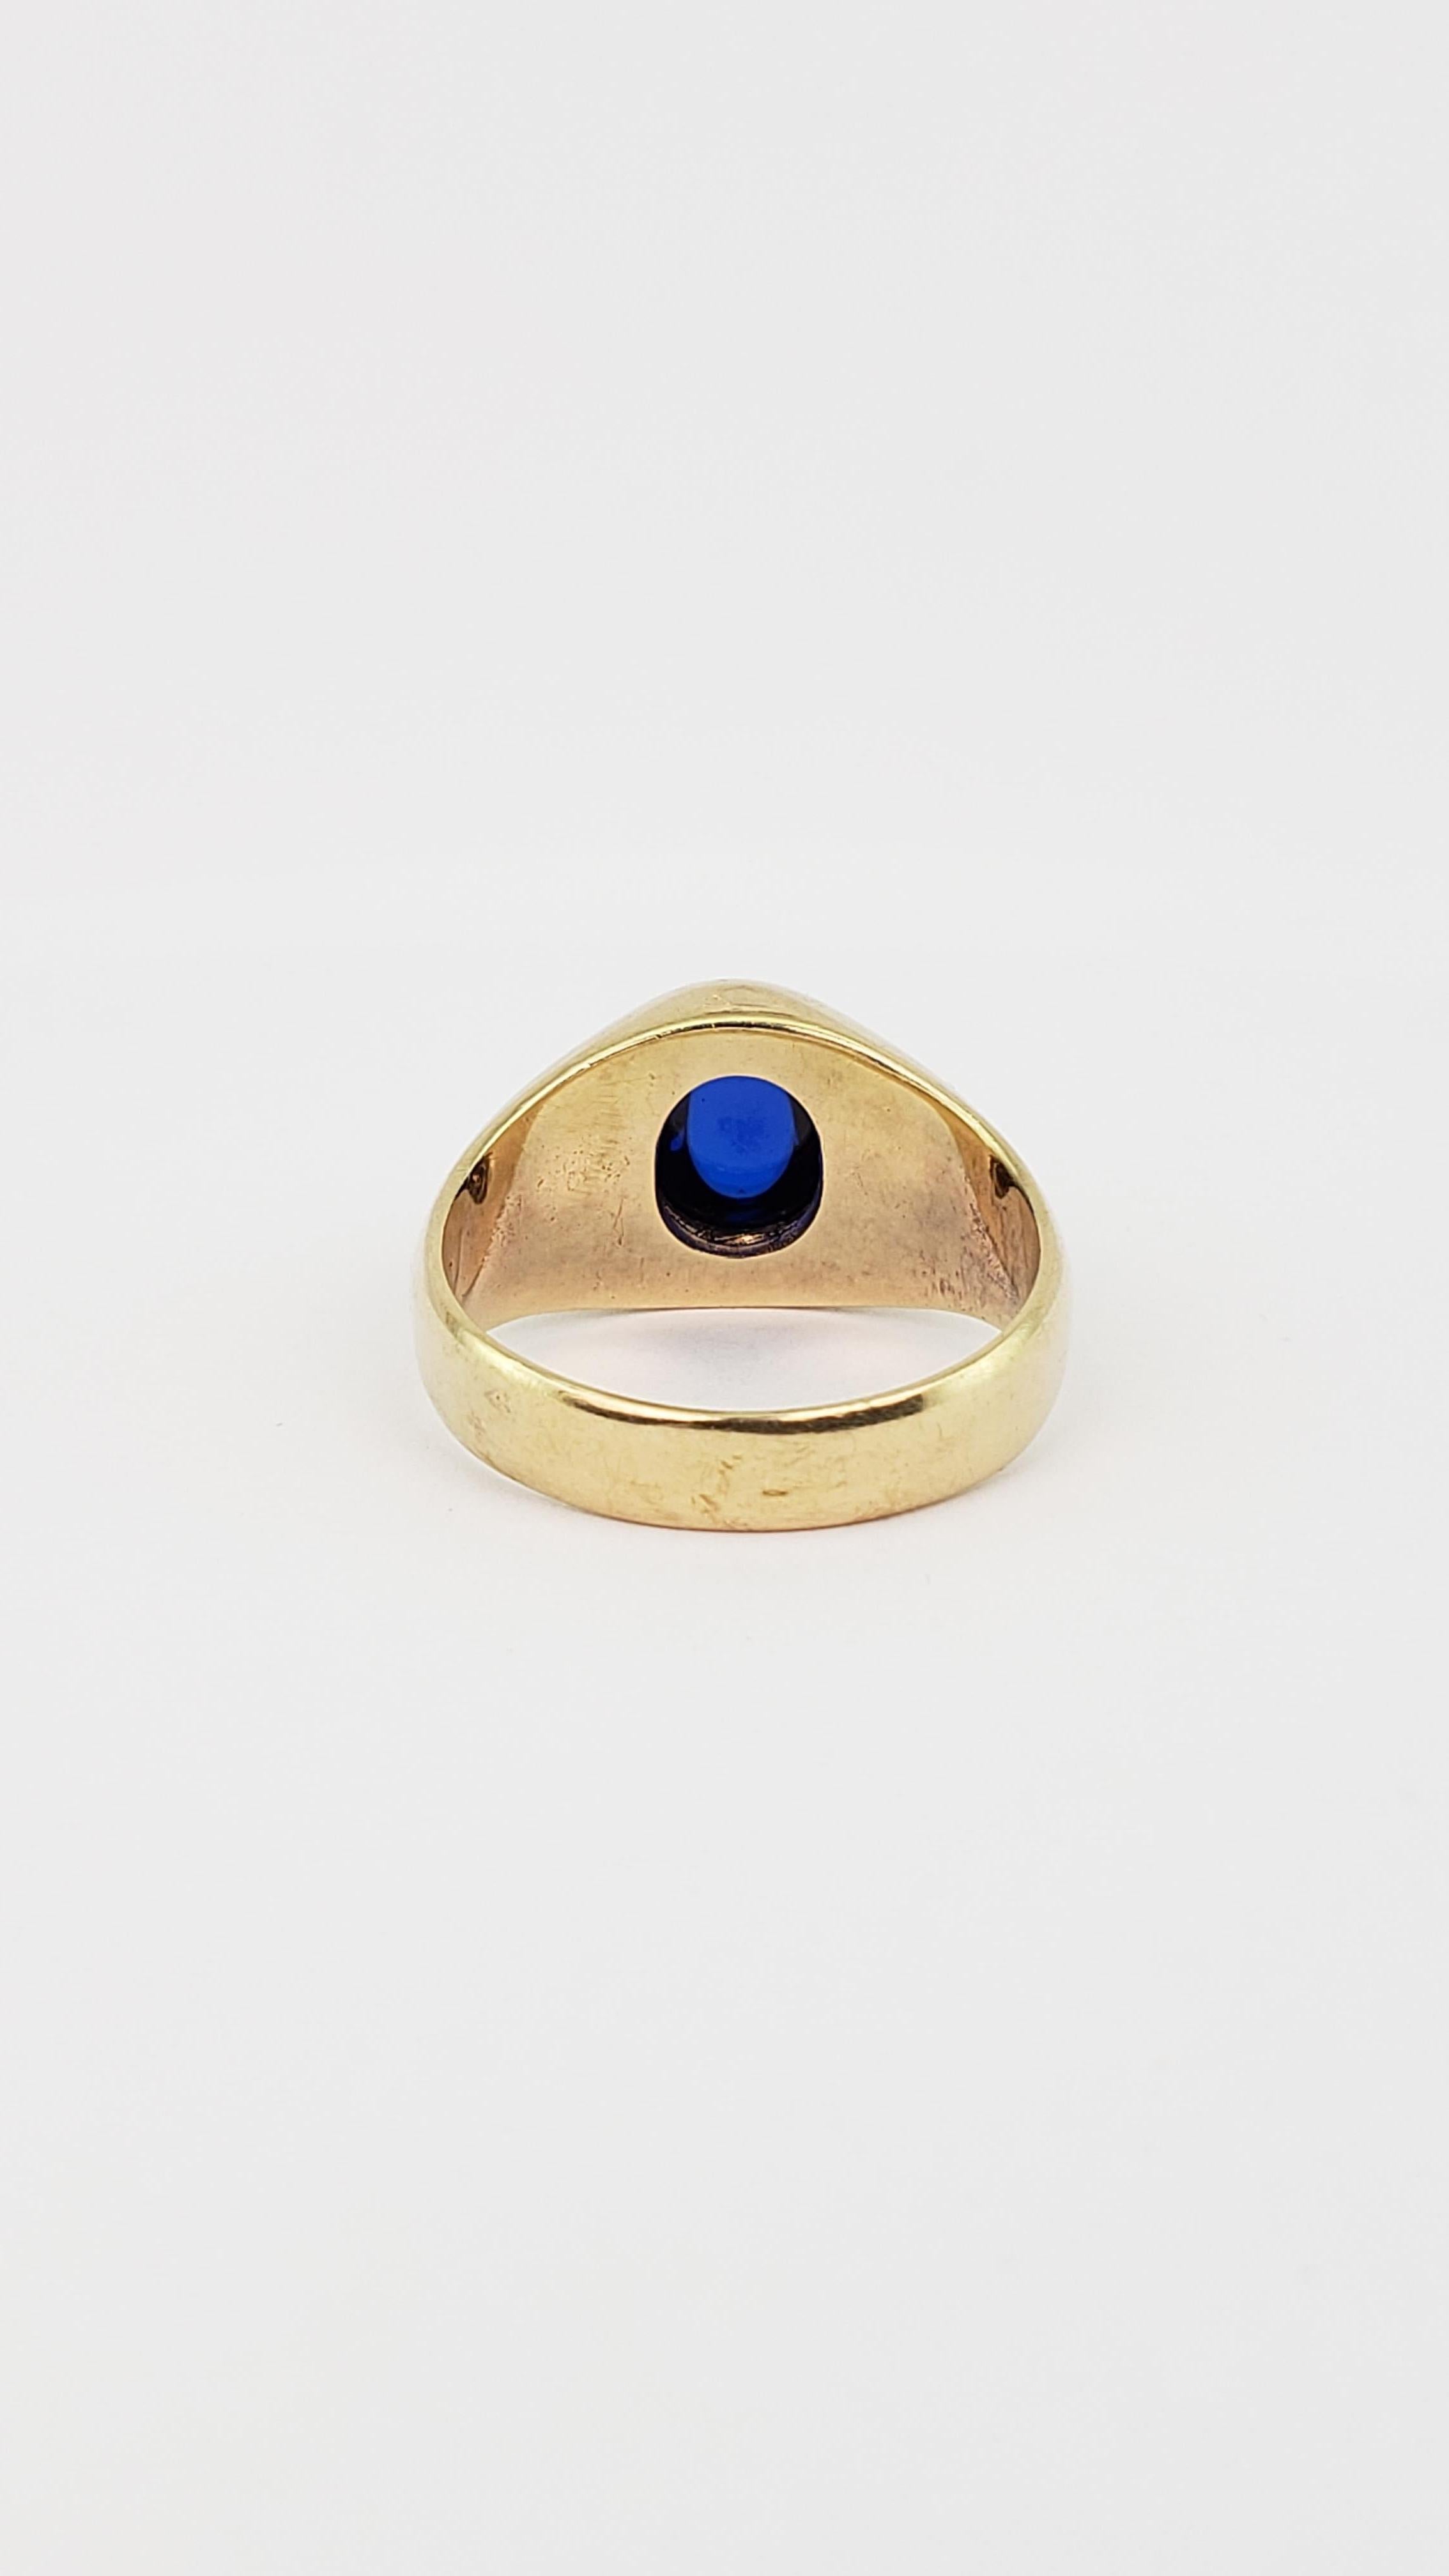 10K Gold Men's or Lady's Ring with Synthetic Blue Sapphire Oval Cabochon 1